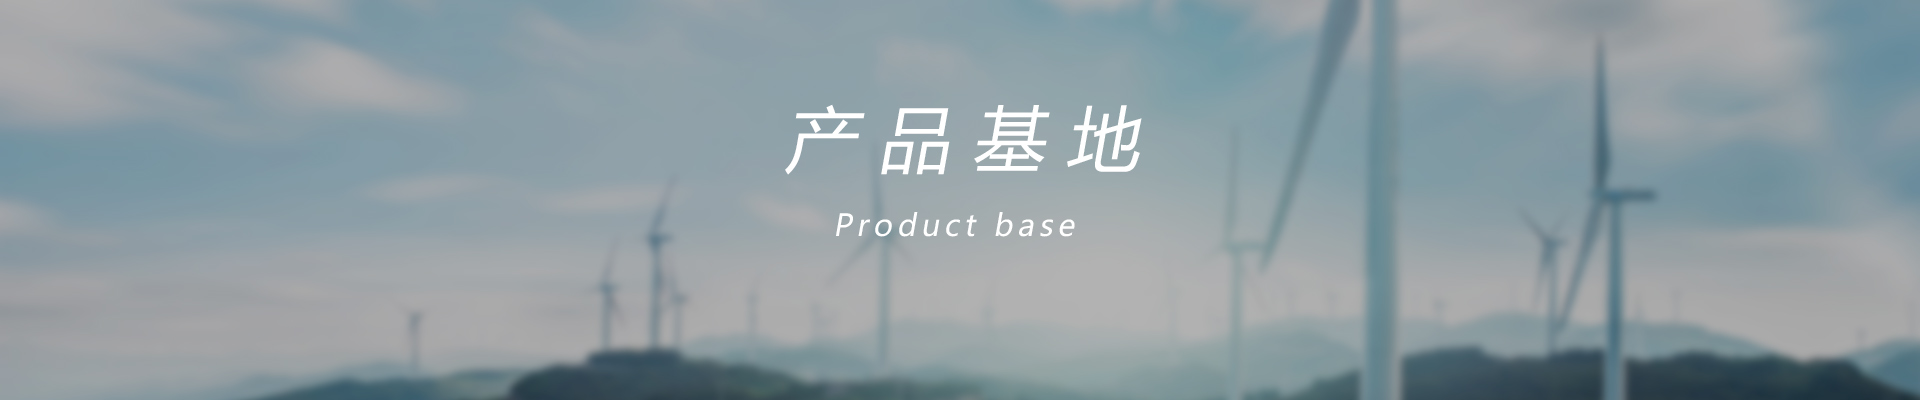 Product bases